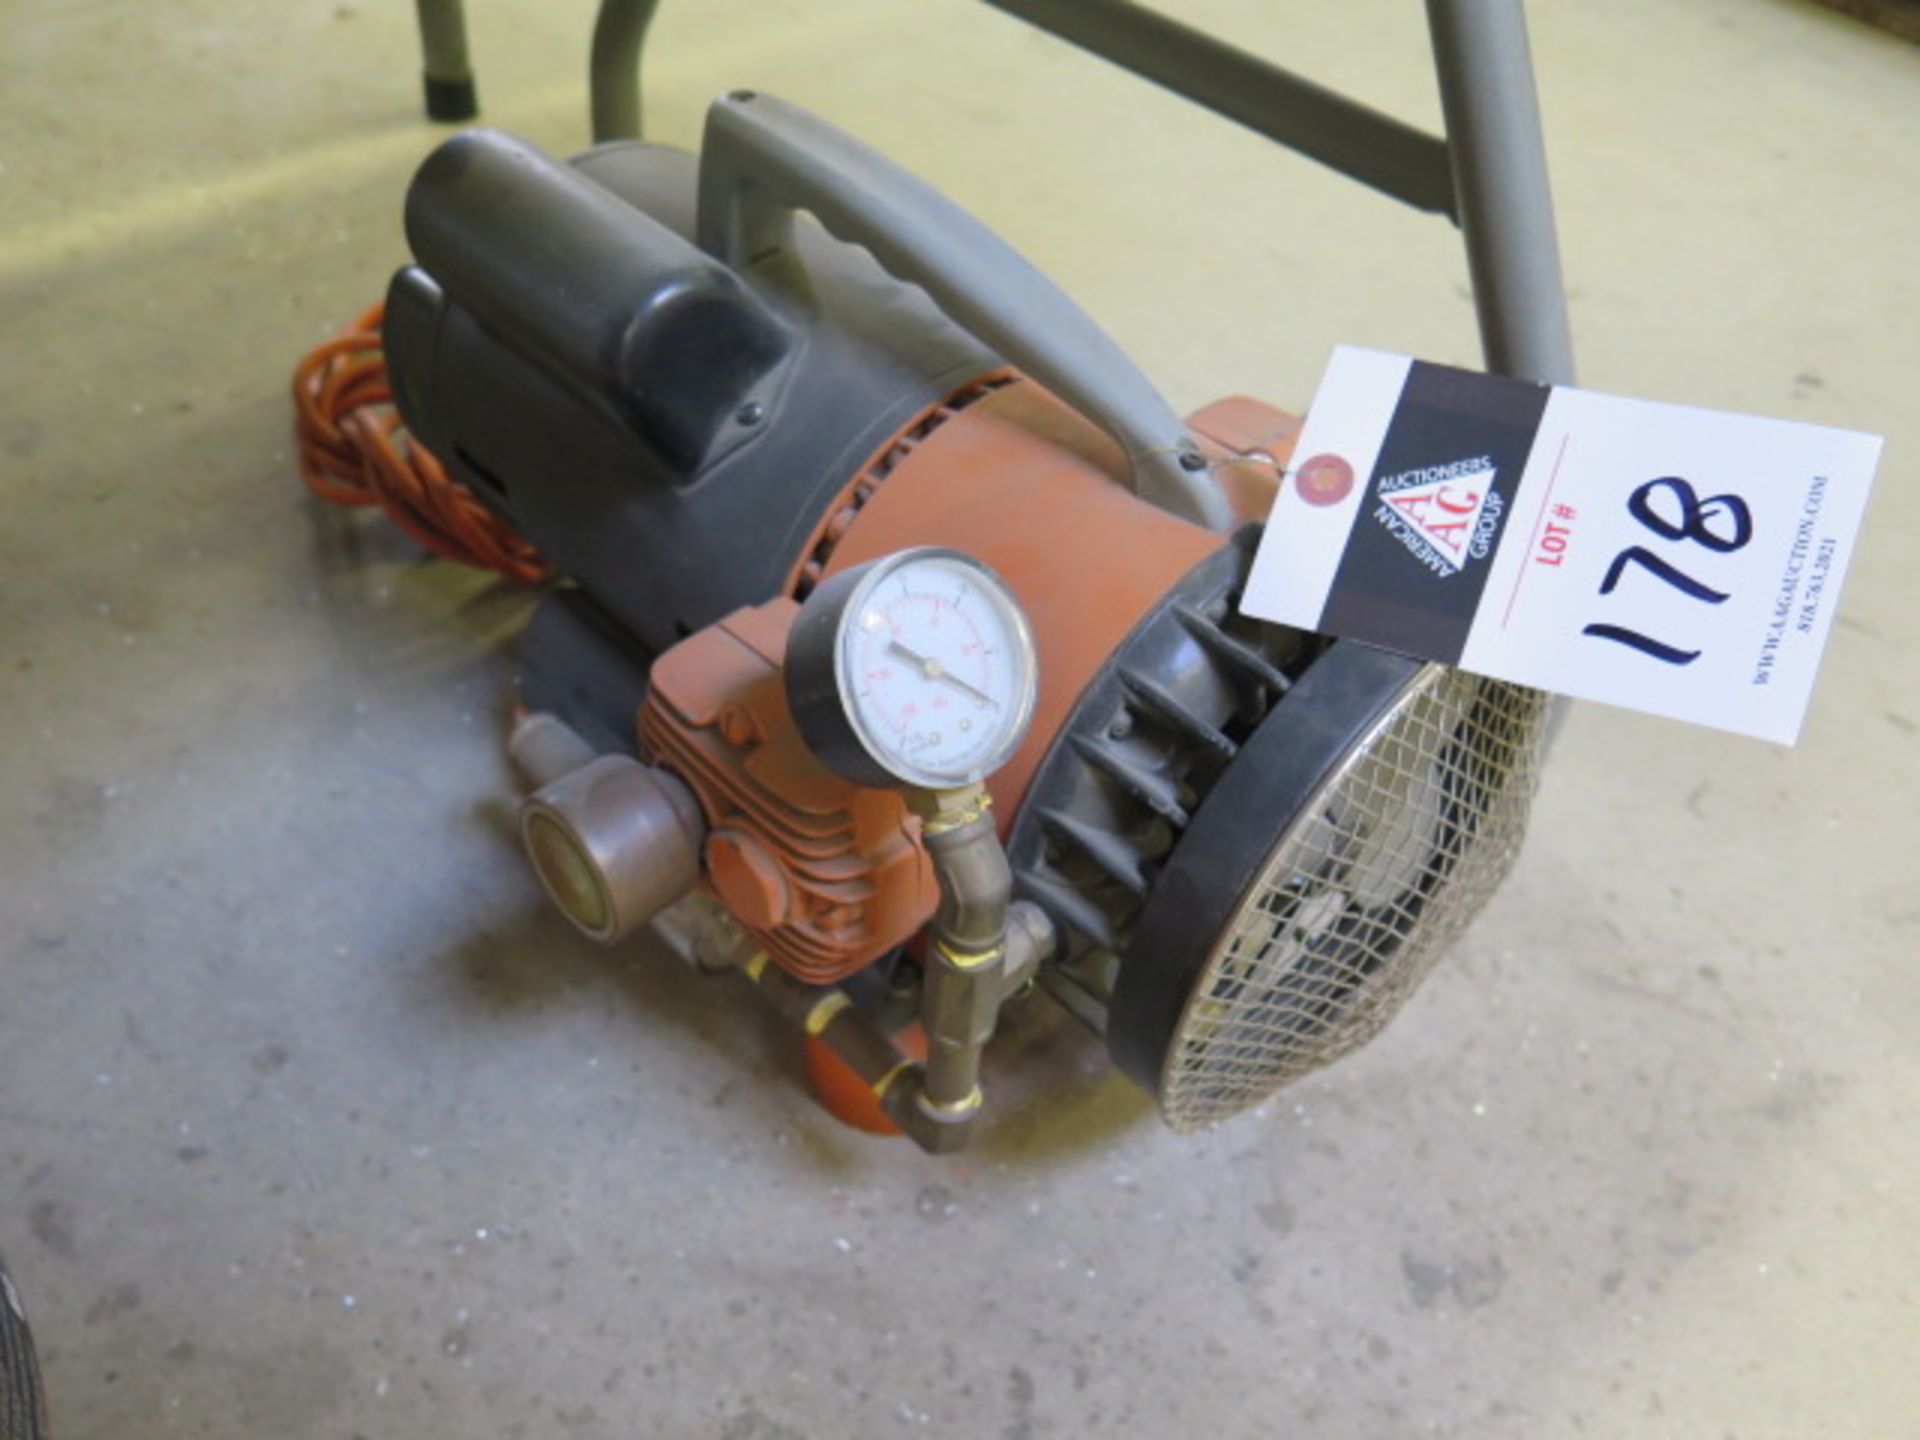 Bell and Gossett SYC20-1 "Oil-Less" Vacuum Pump (SOLD AS-IS - NO WARRANTY) - Image 2 of 3